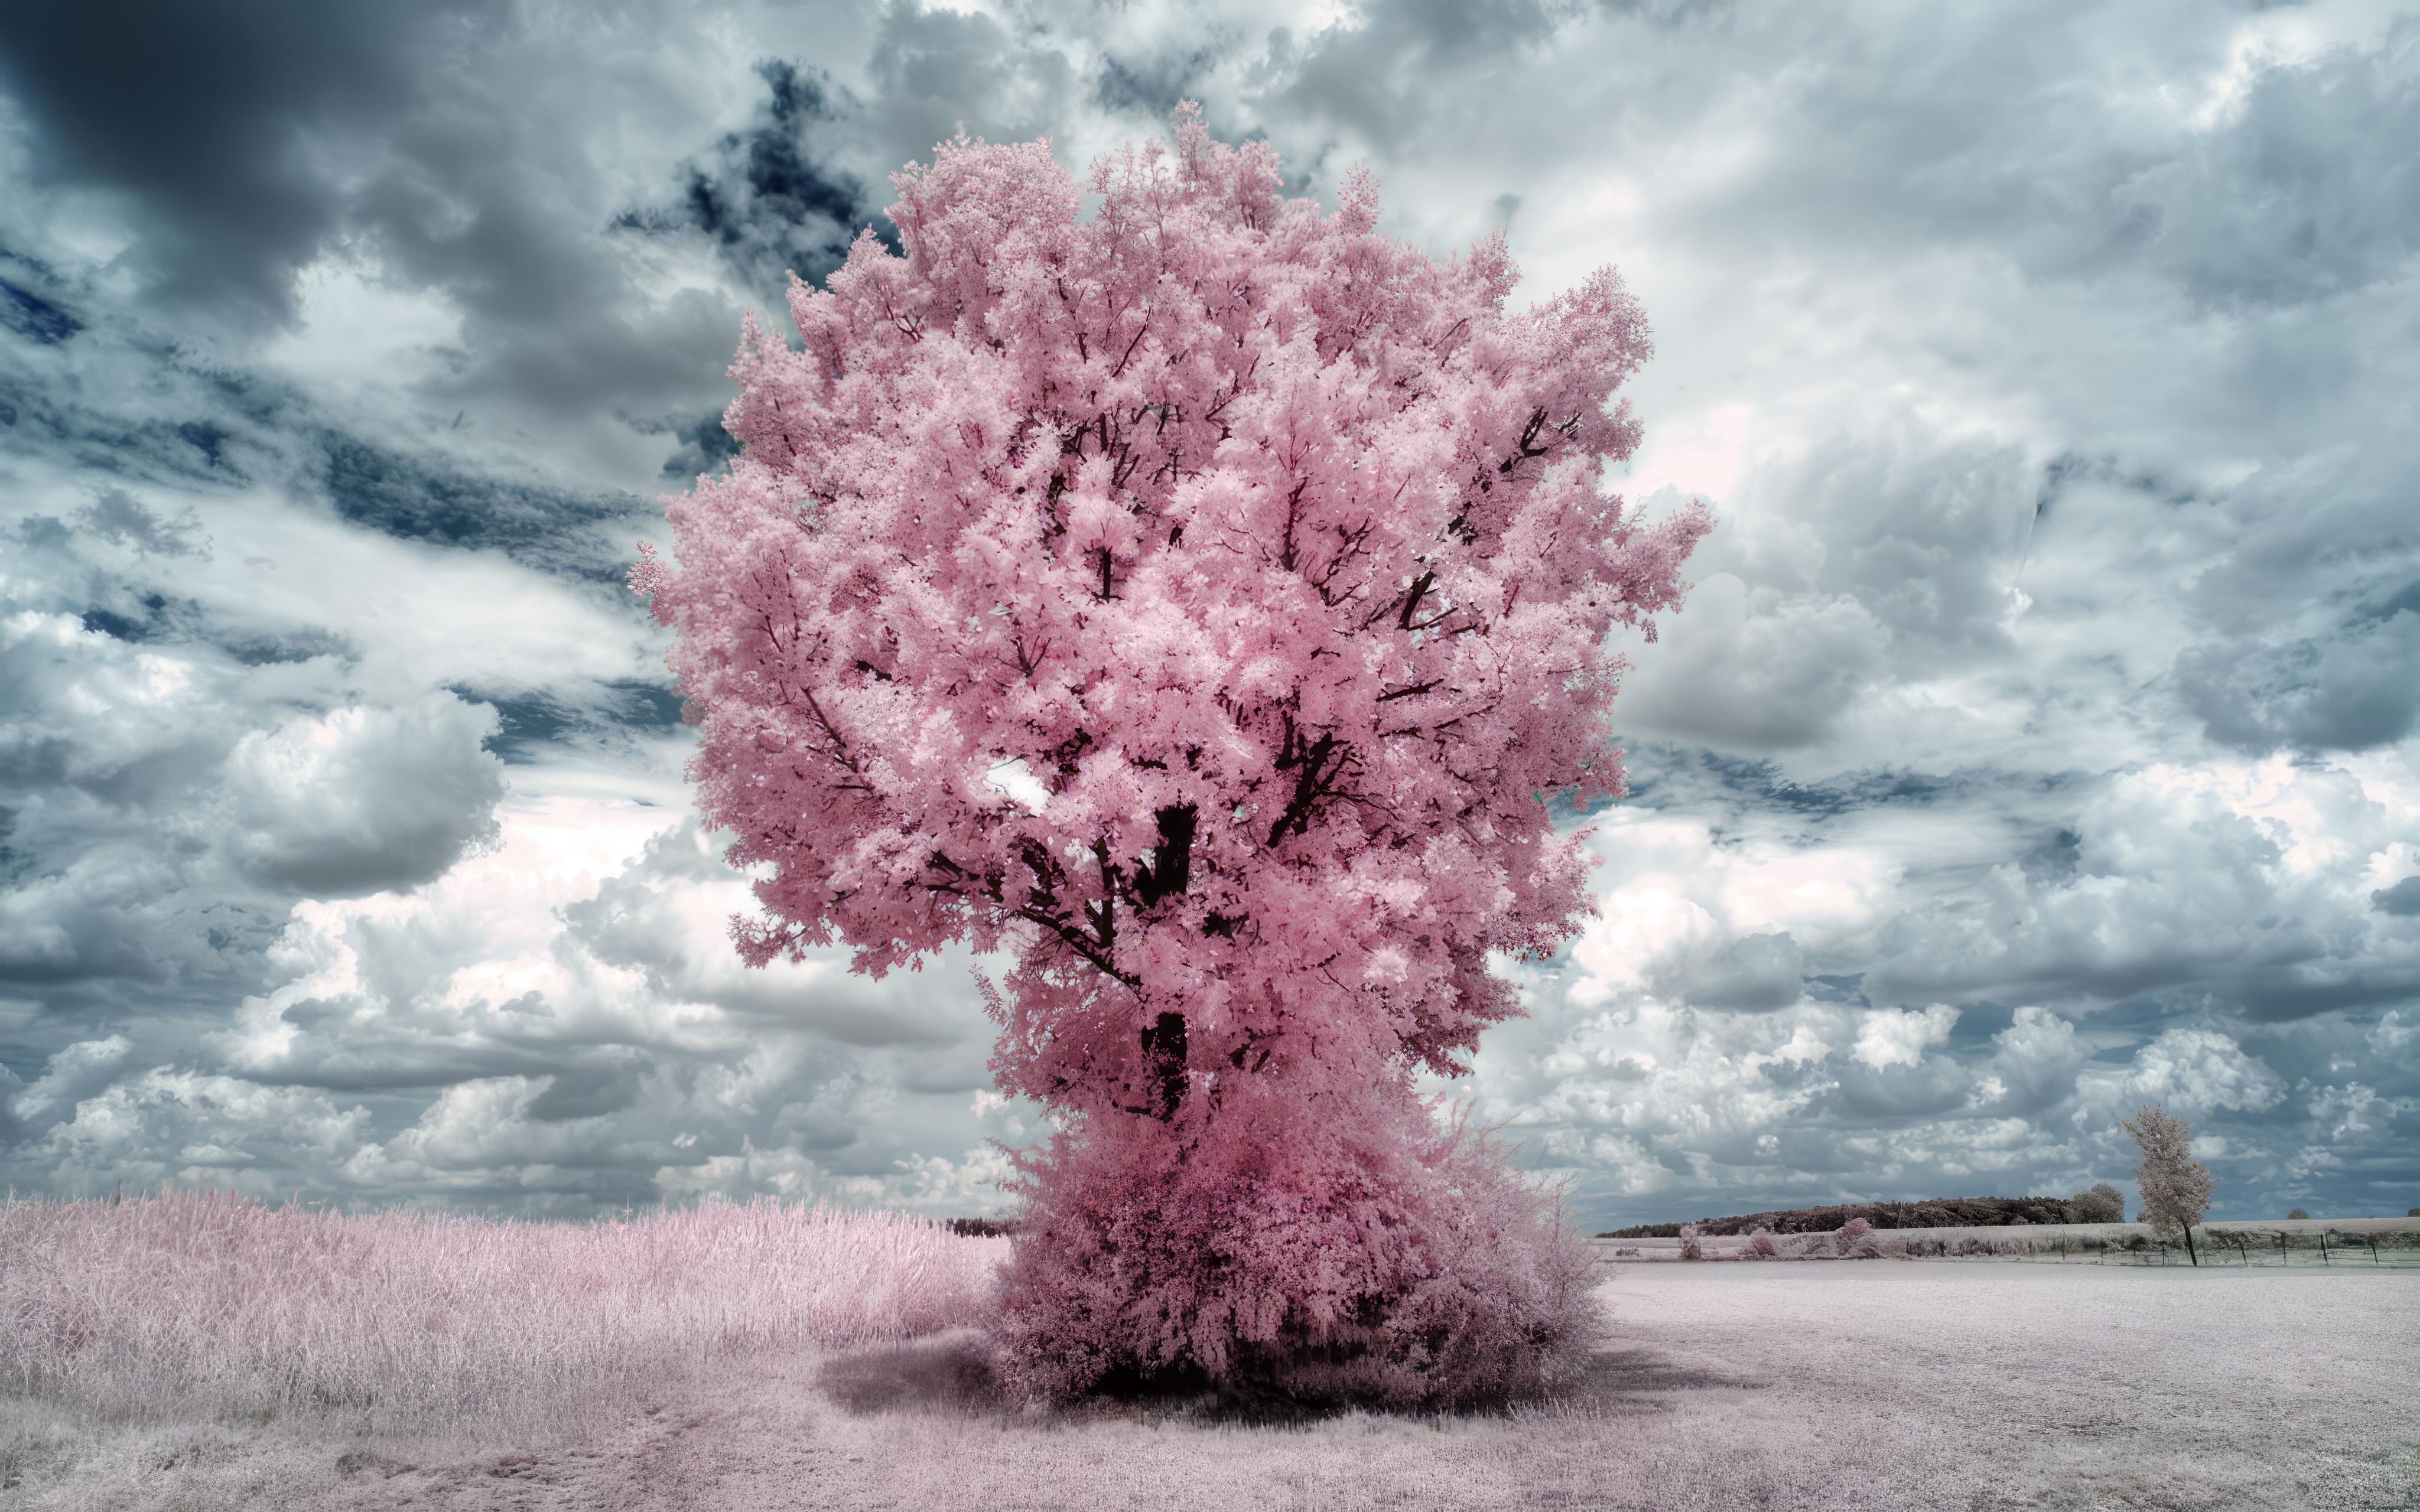 General 4096x2560 trees pink clouds infrared surreal white pastel